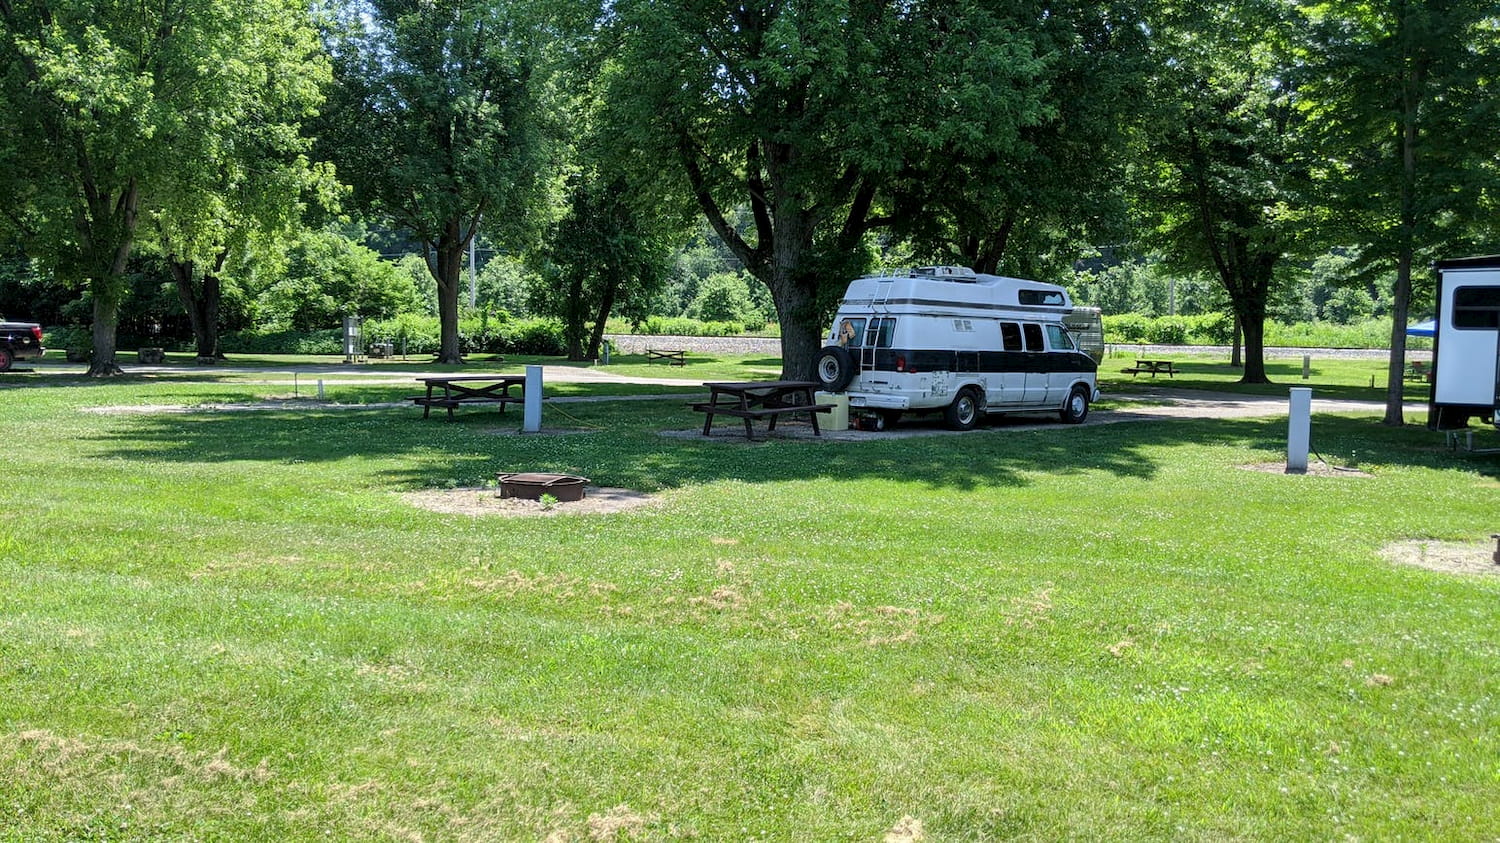 camper parked at camp spot under tree in green grass field